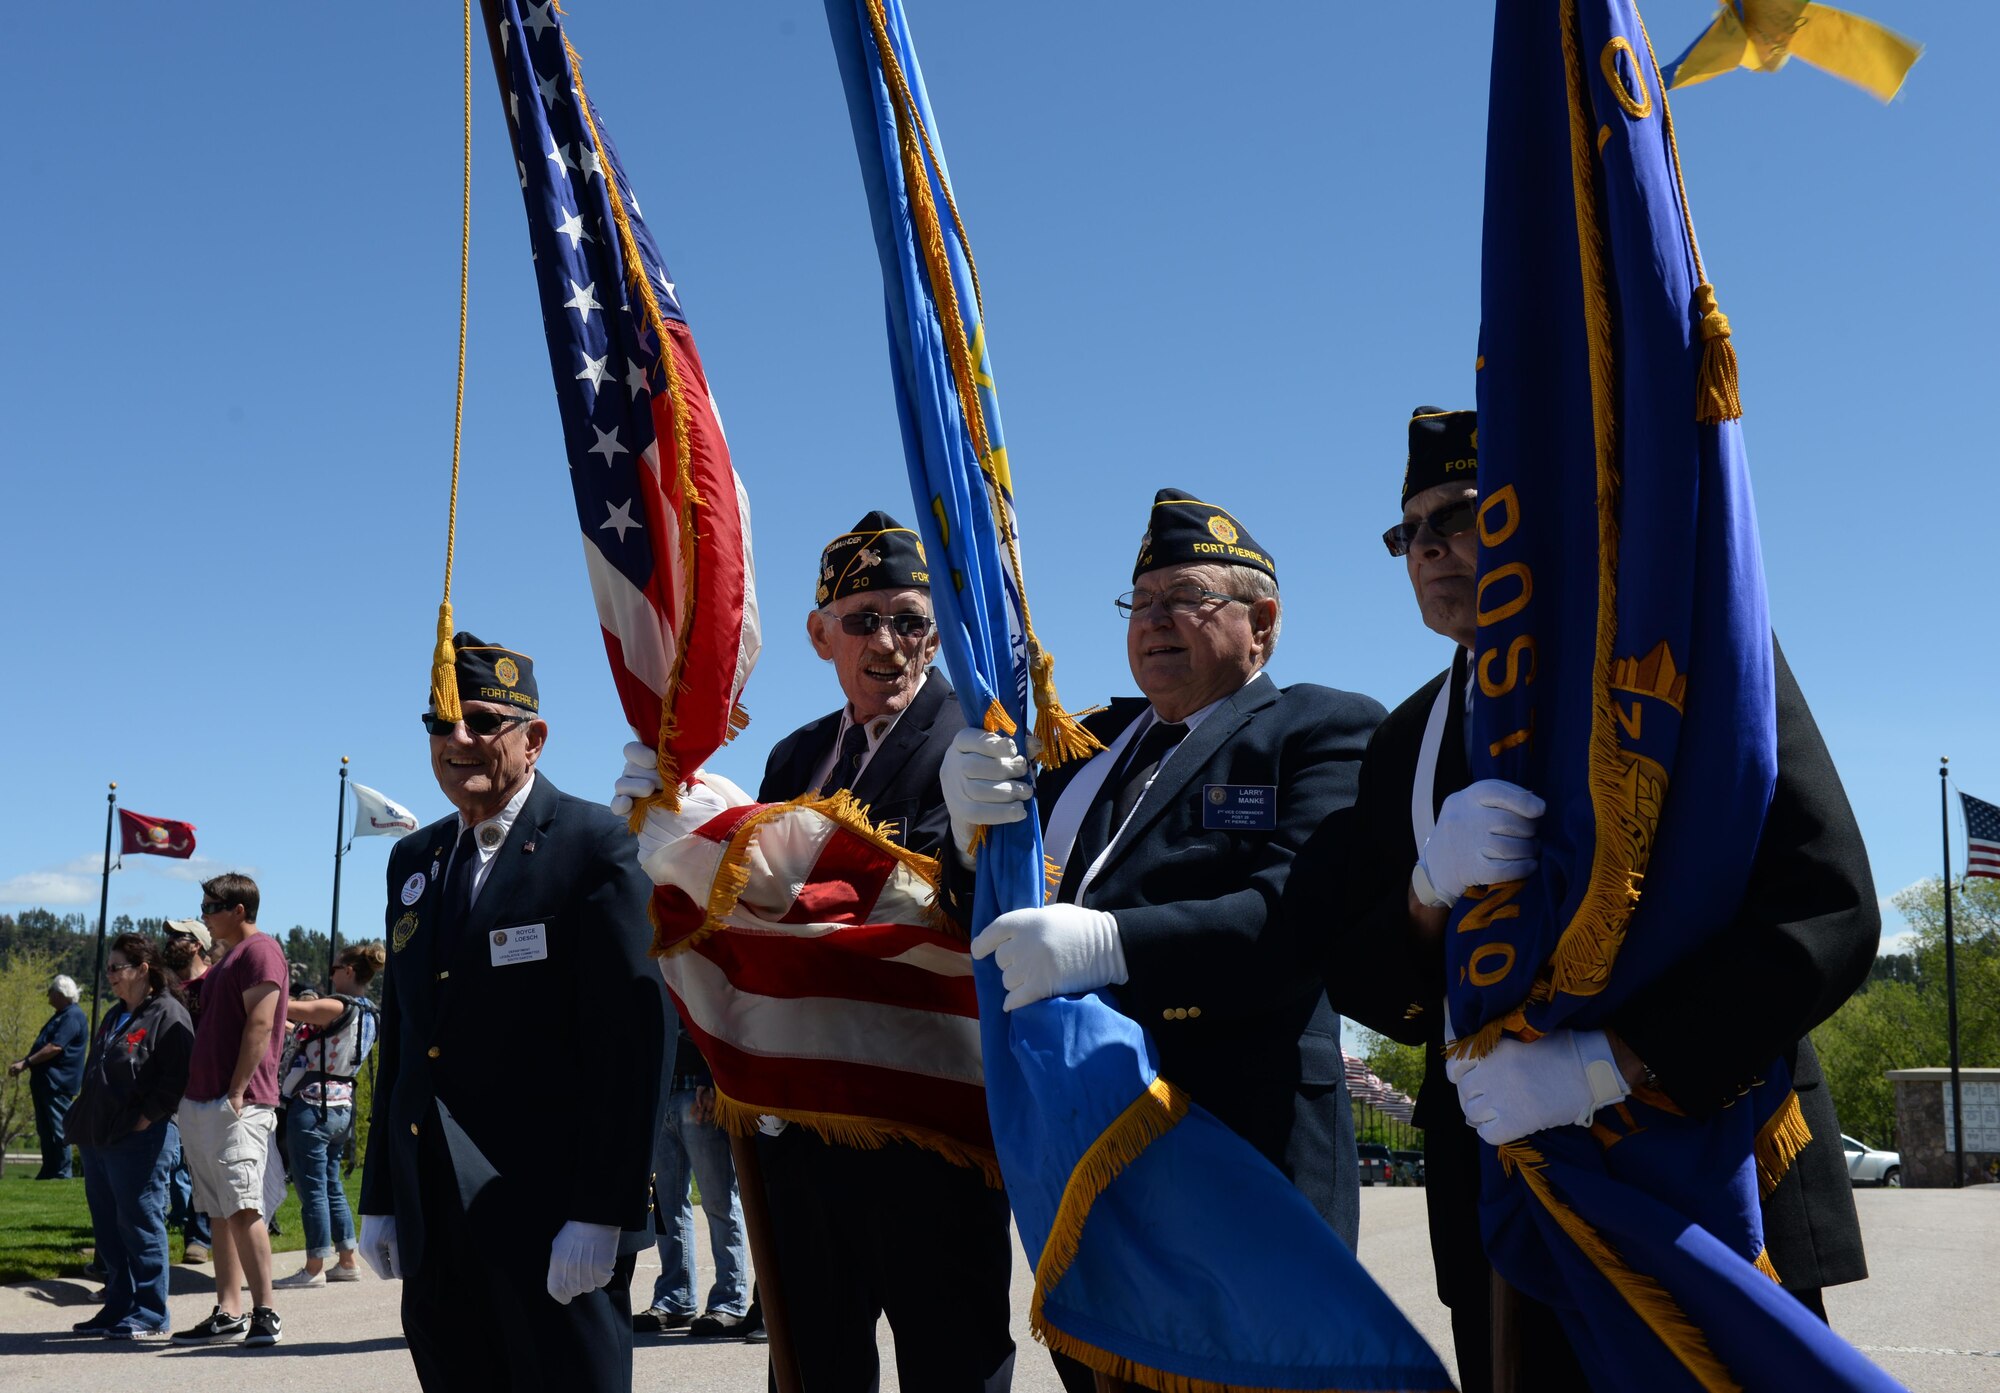 Members of the South Dakota American Legion prepare to post the colors for Memorial Day at the Black Hills National Cemetery, S.D., May 29, 2017. The American Legion helped plan the memorial service that occurred on May 29, and helped place U.S. flags at all the gravestones in the cemetery. (U.S. Air Force photo by Airman Nicolas Z. Erwin)